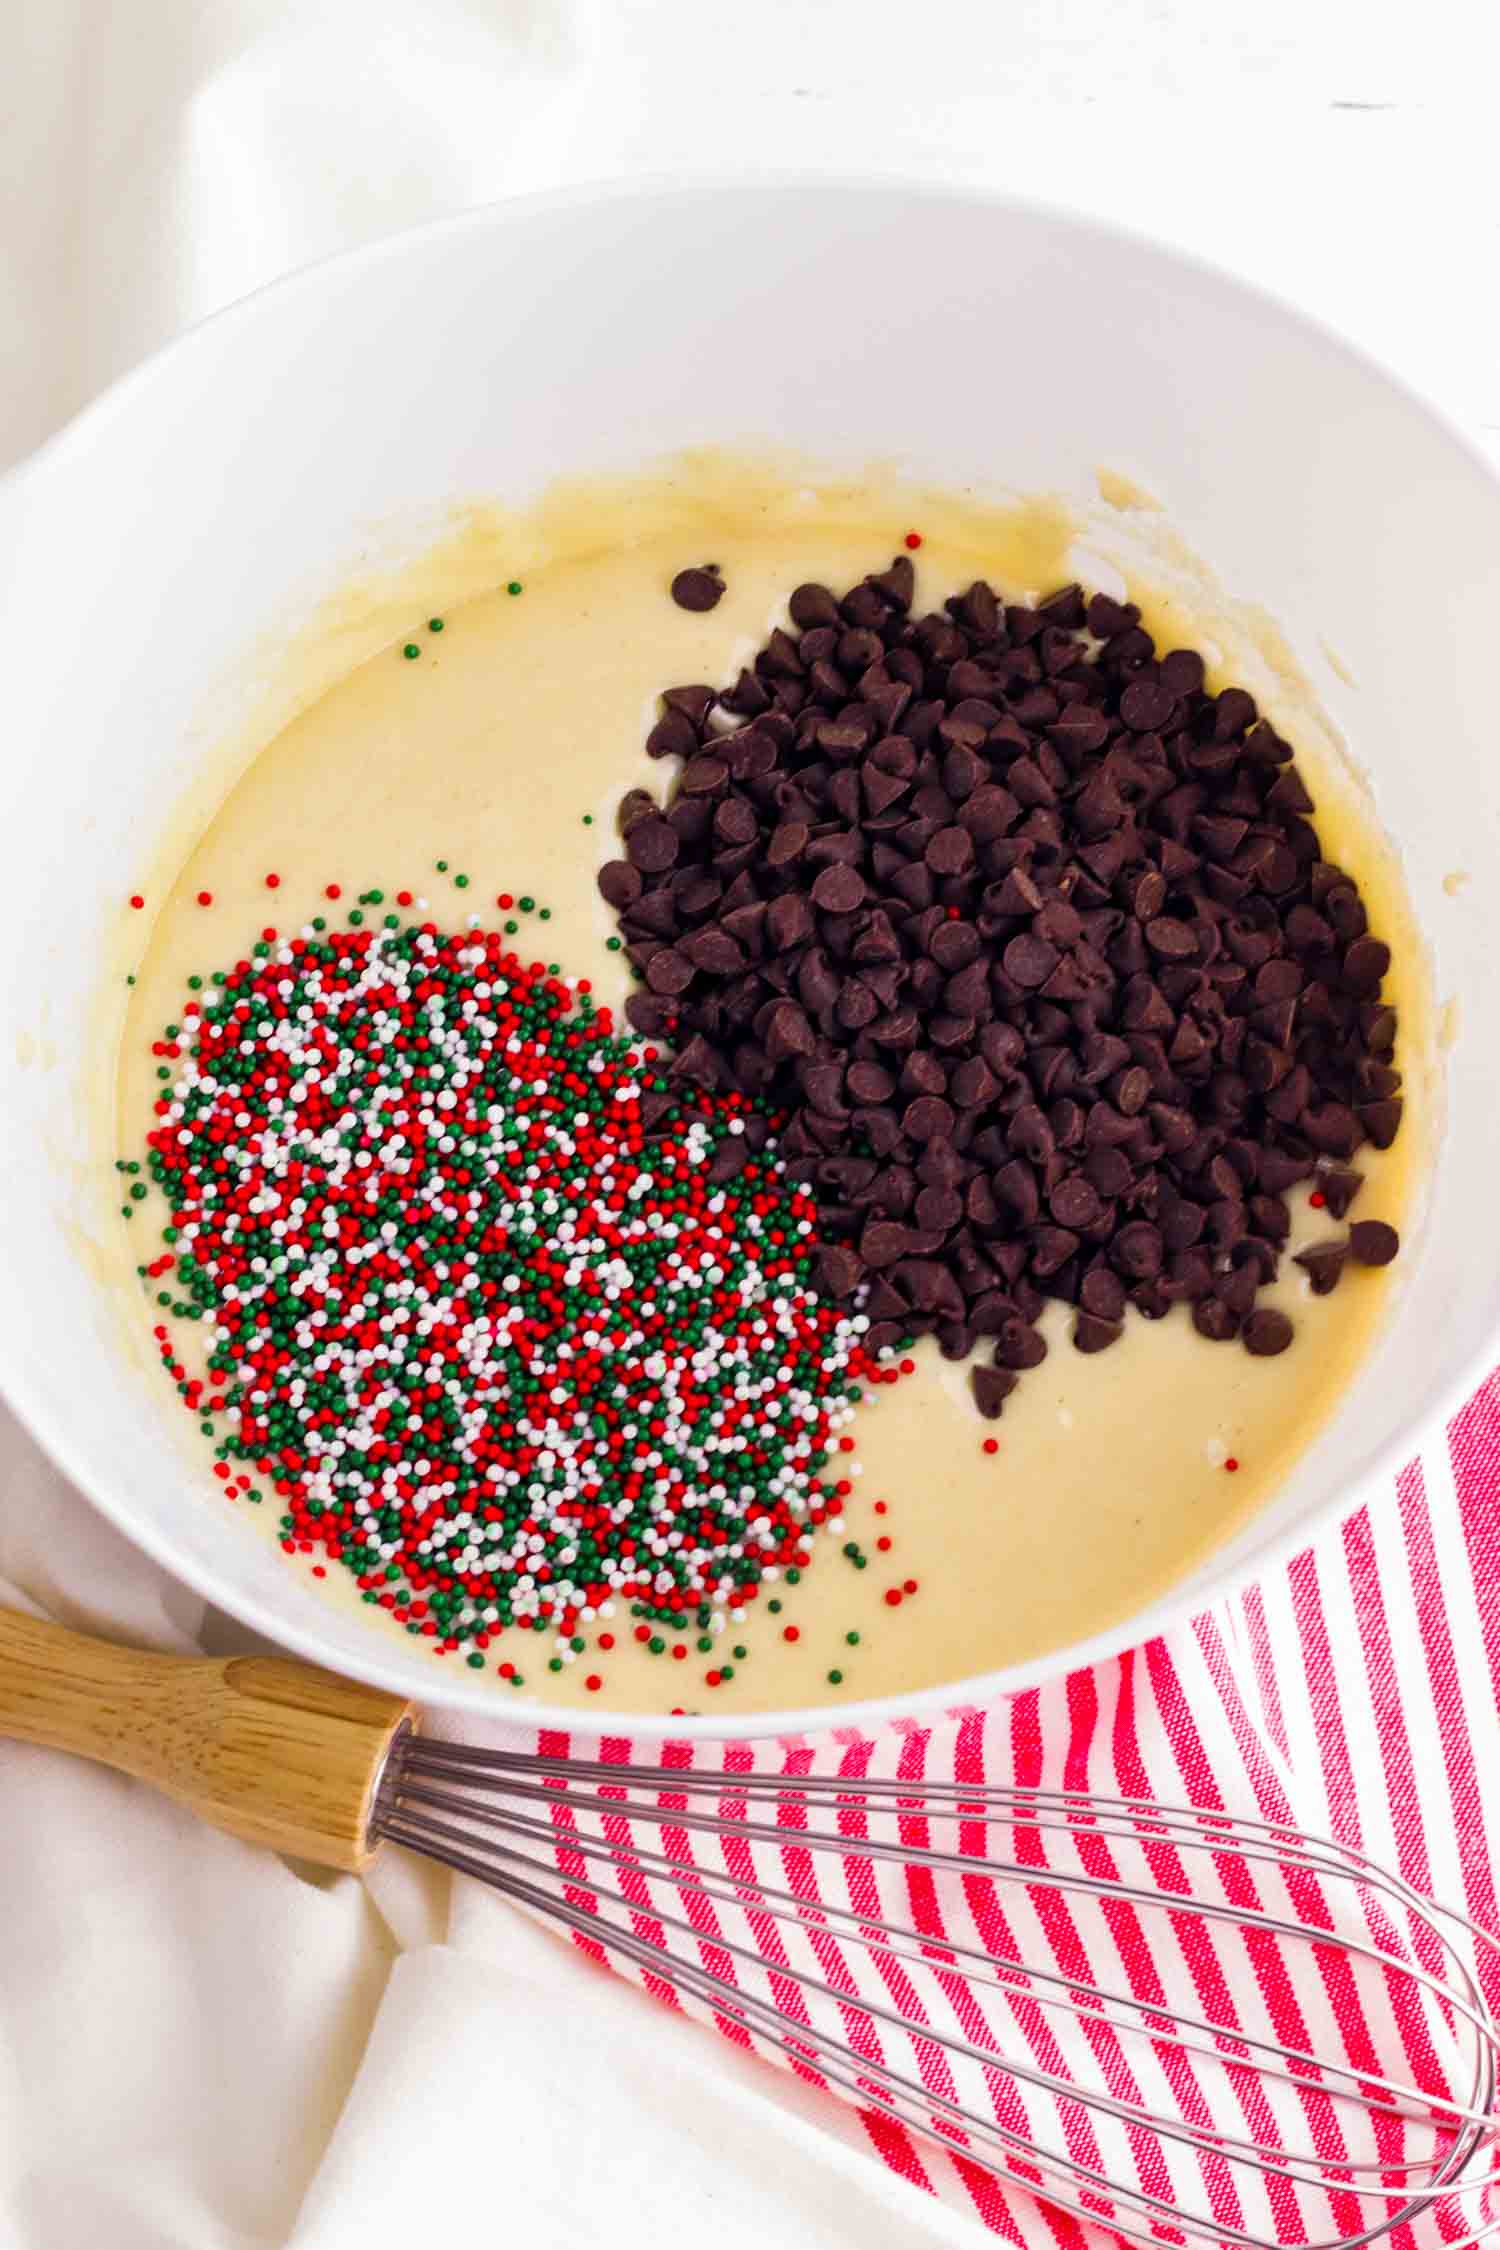 Mini chocolate chips and Christmas sprinkles in white bowl with whisk and red and white tea towel.